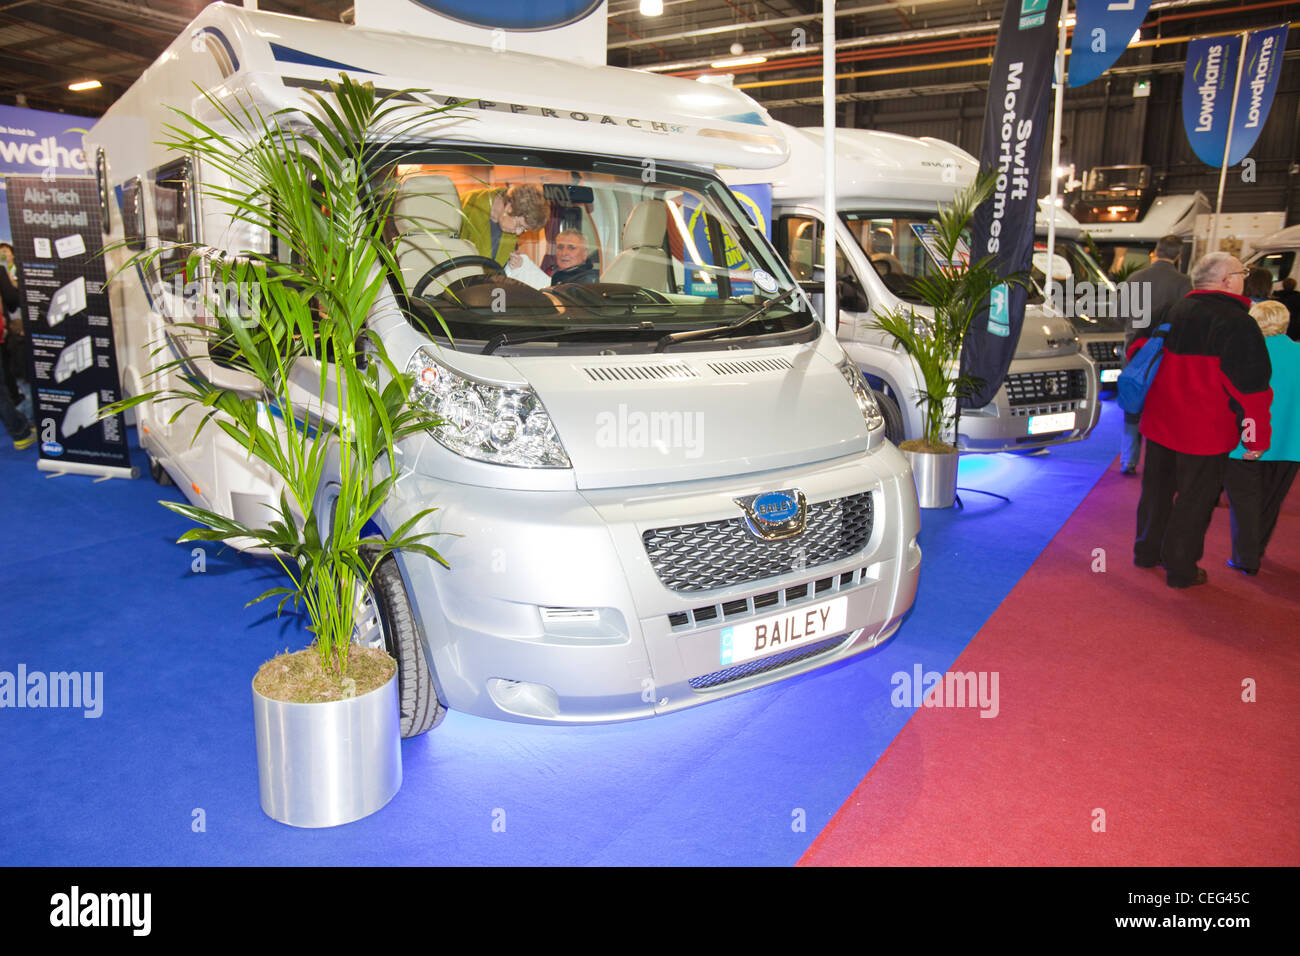 A motor home at the Caravan and motor home show at Event City in Manchester, UK. Stock Photo